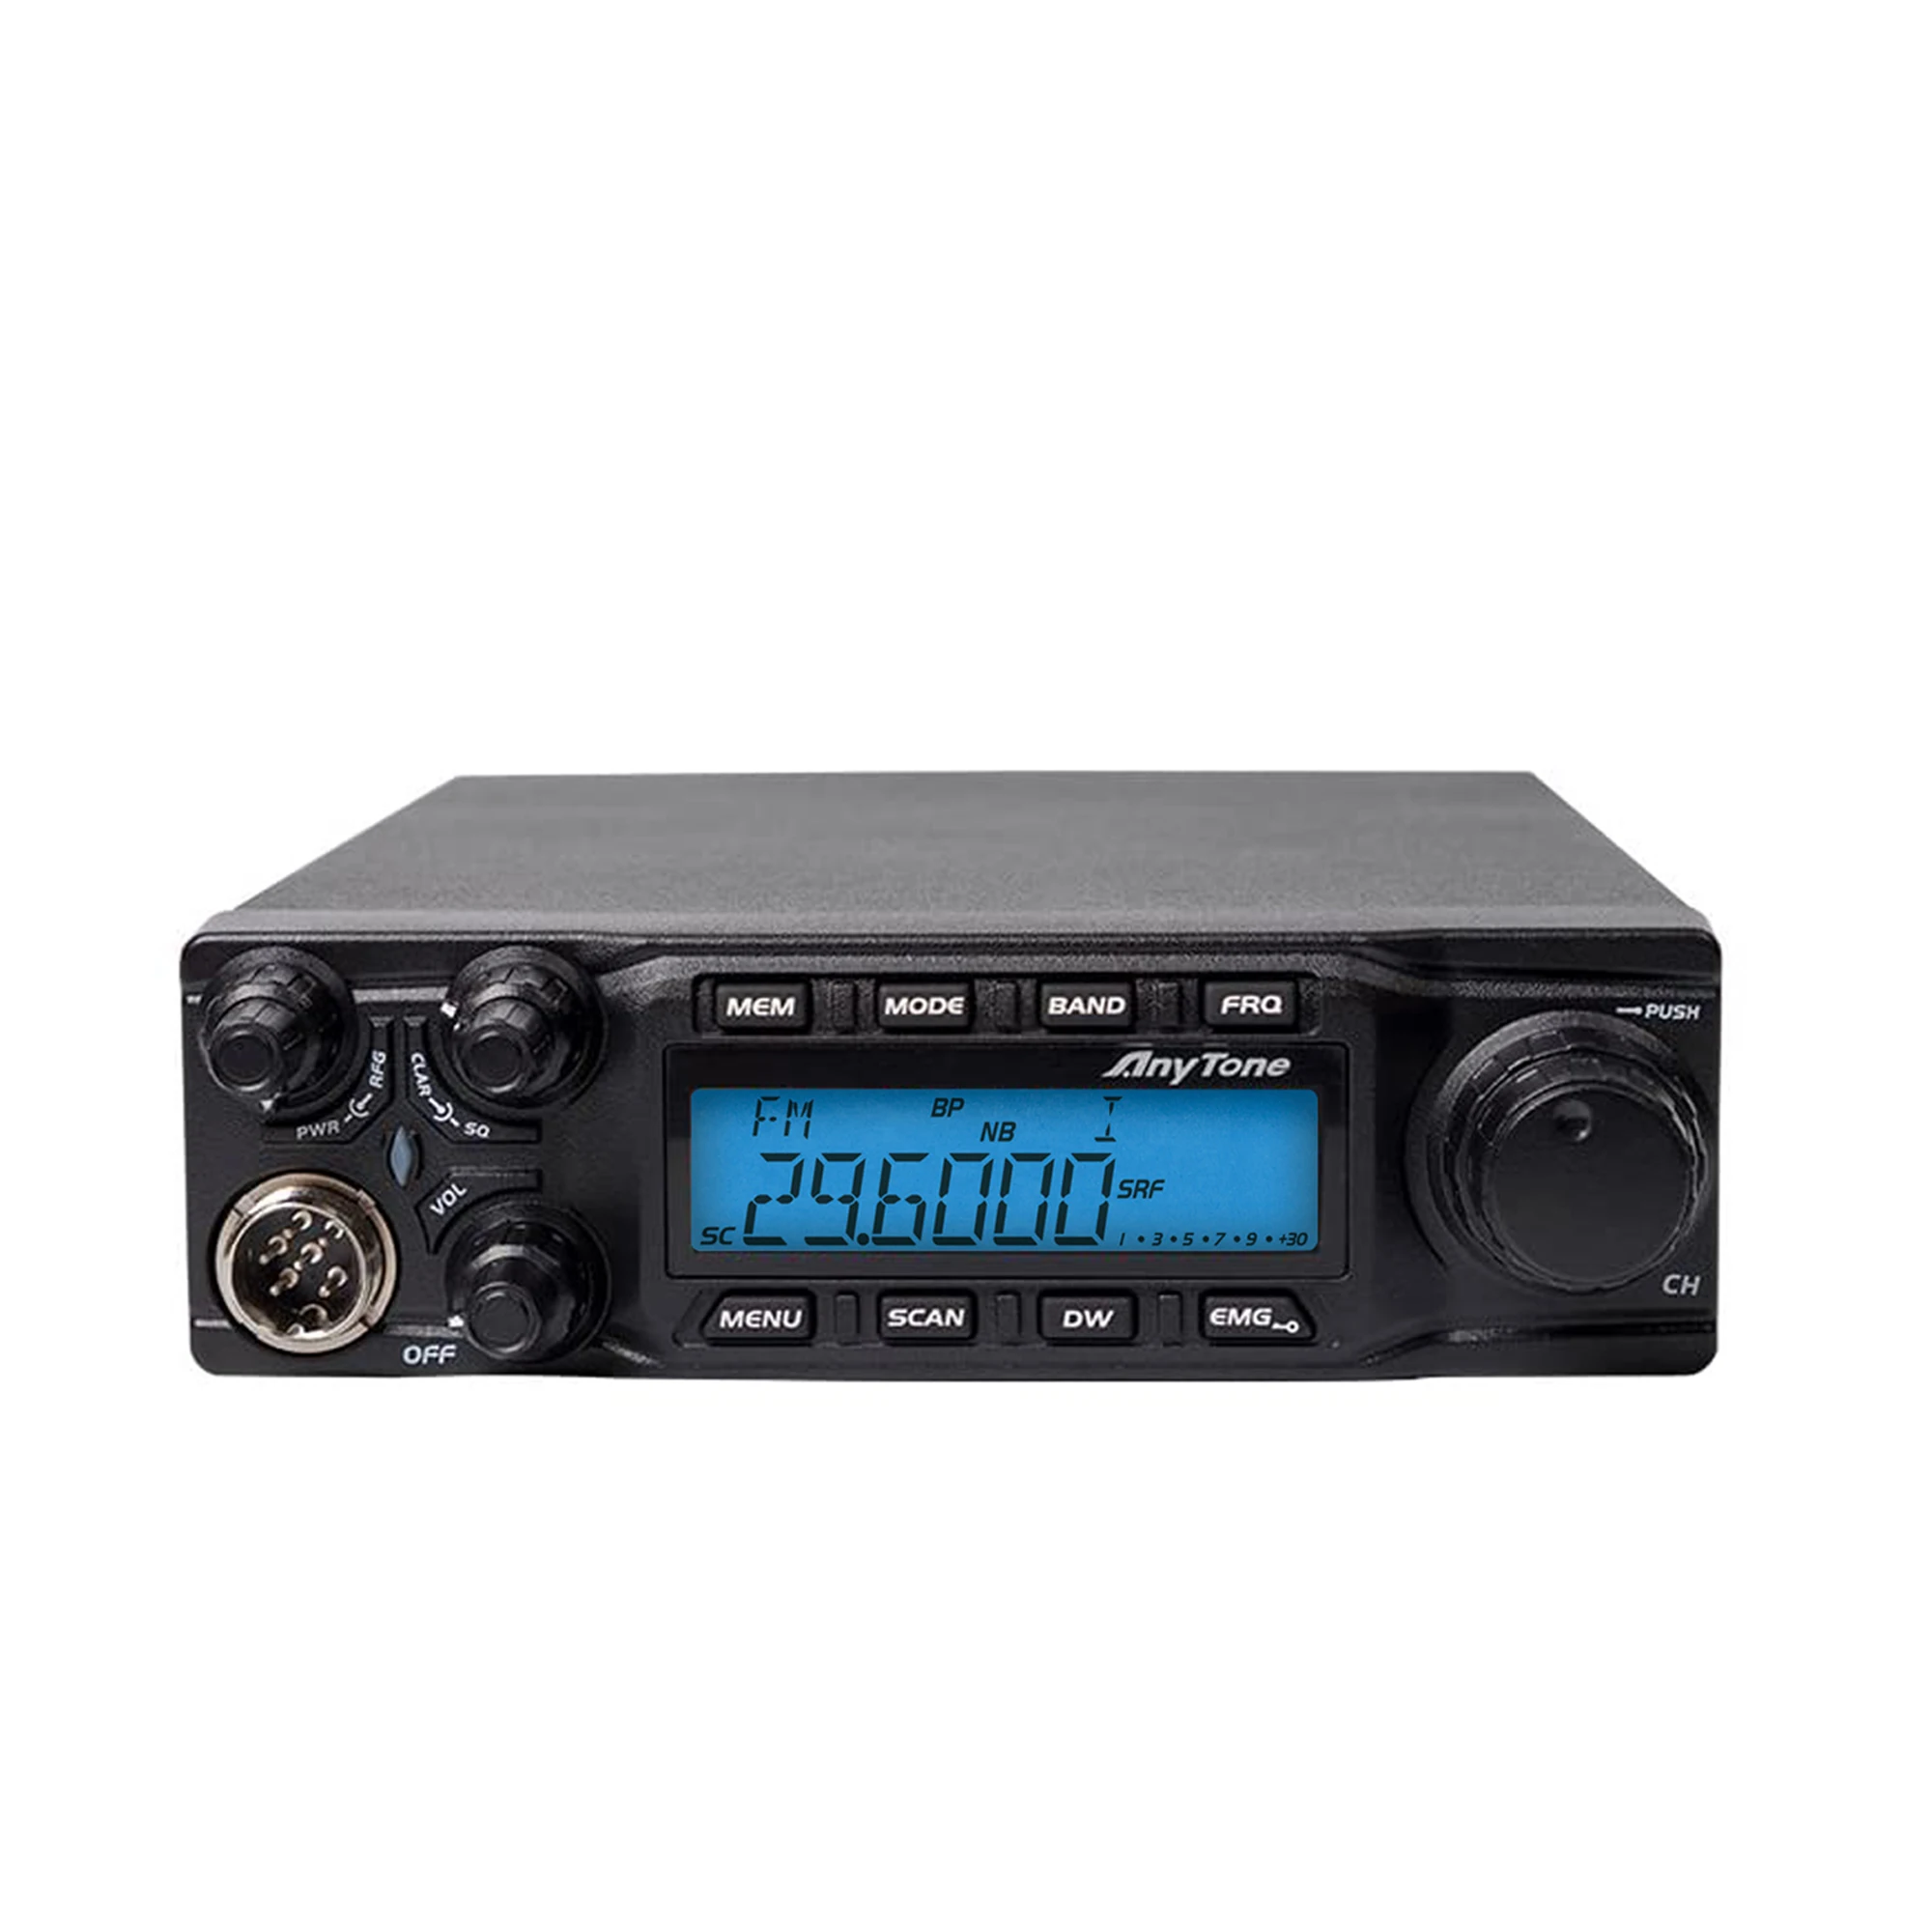 

AnyTone AT-6666 High Power 60W/45W/15W Mobile Transceiver 10 Meter Radio 28.000-29.700MHz SSB/AM/FM 40CH Programmable